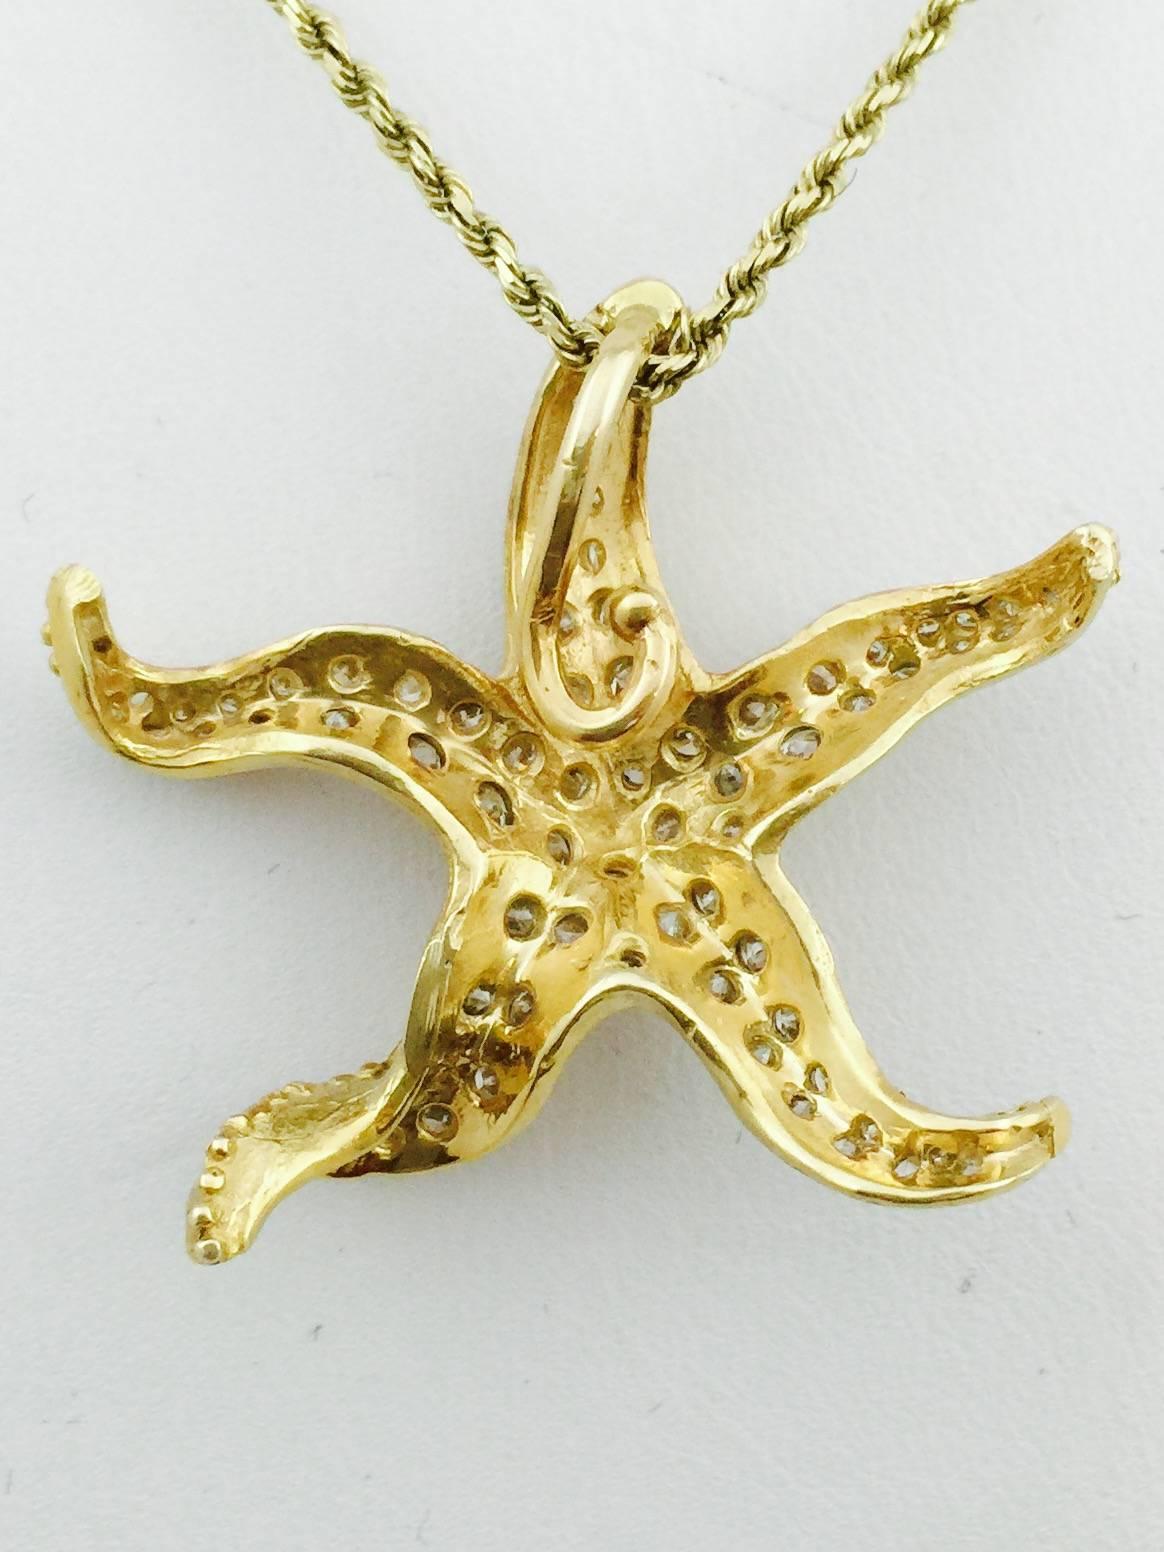 A beautifully detailed 18 karat yellow gold dimensional starfish encrusted in prong set brilliant cut diamonds having H color, VS1 clarity and an approximate total weight of 2.90 carats.  Knobby details, twists and curves bring life to this sea